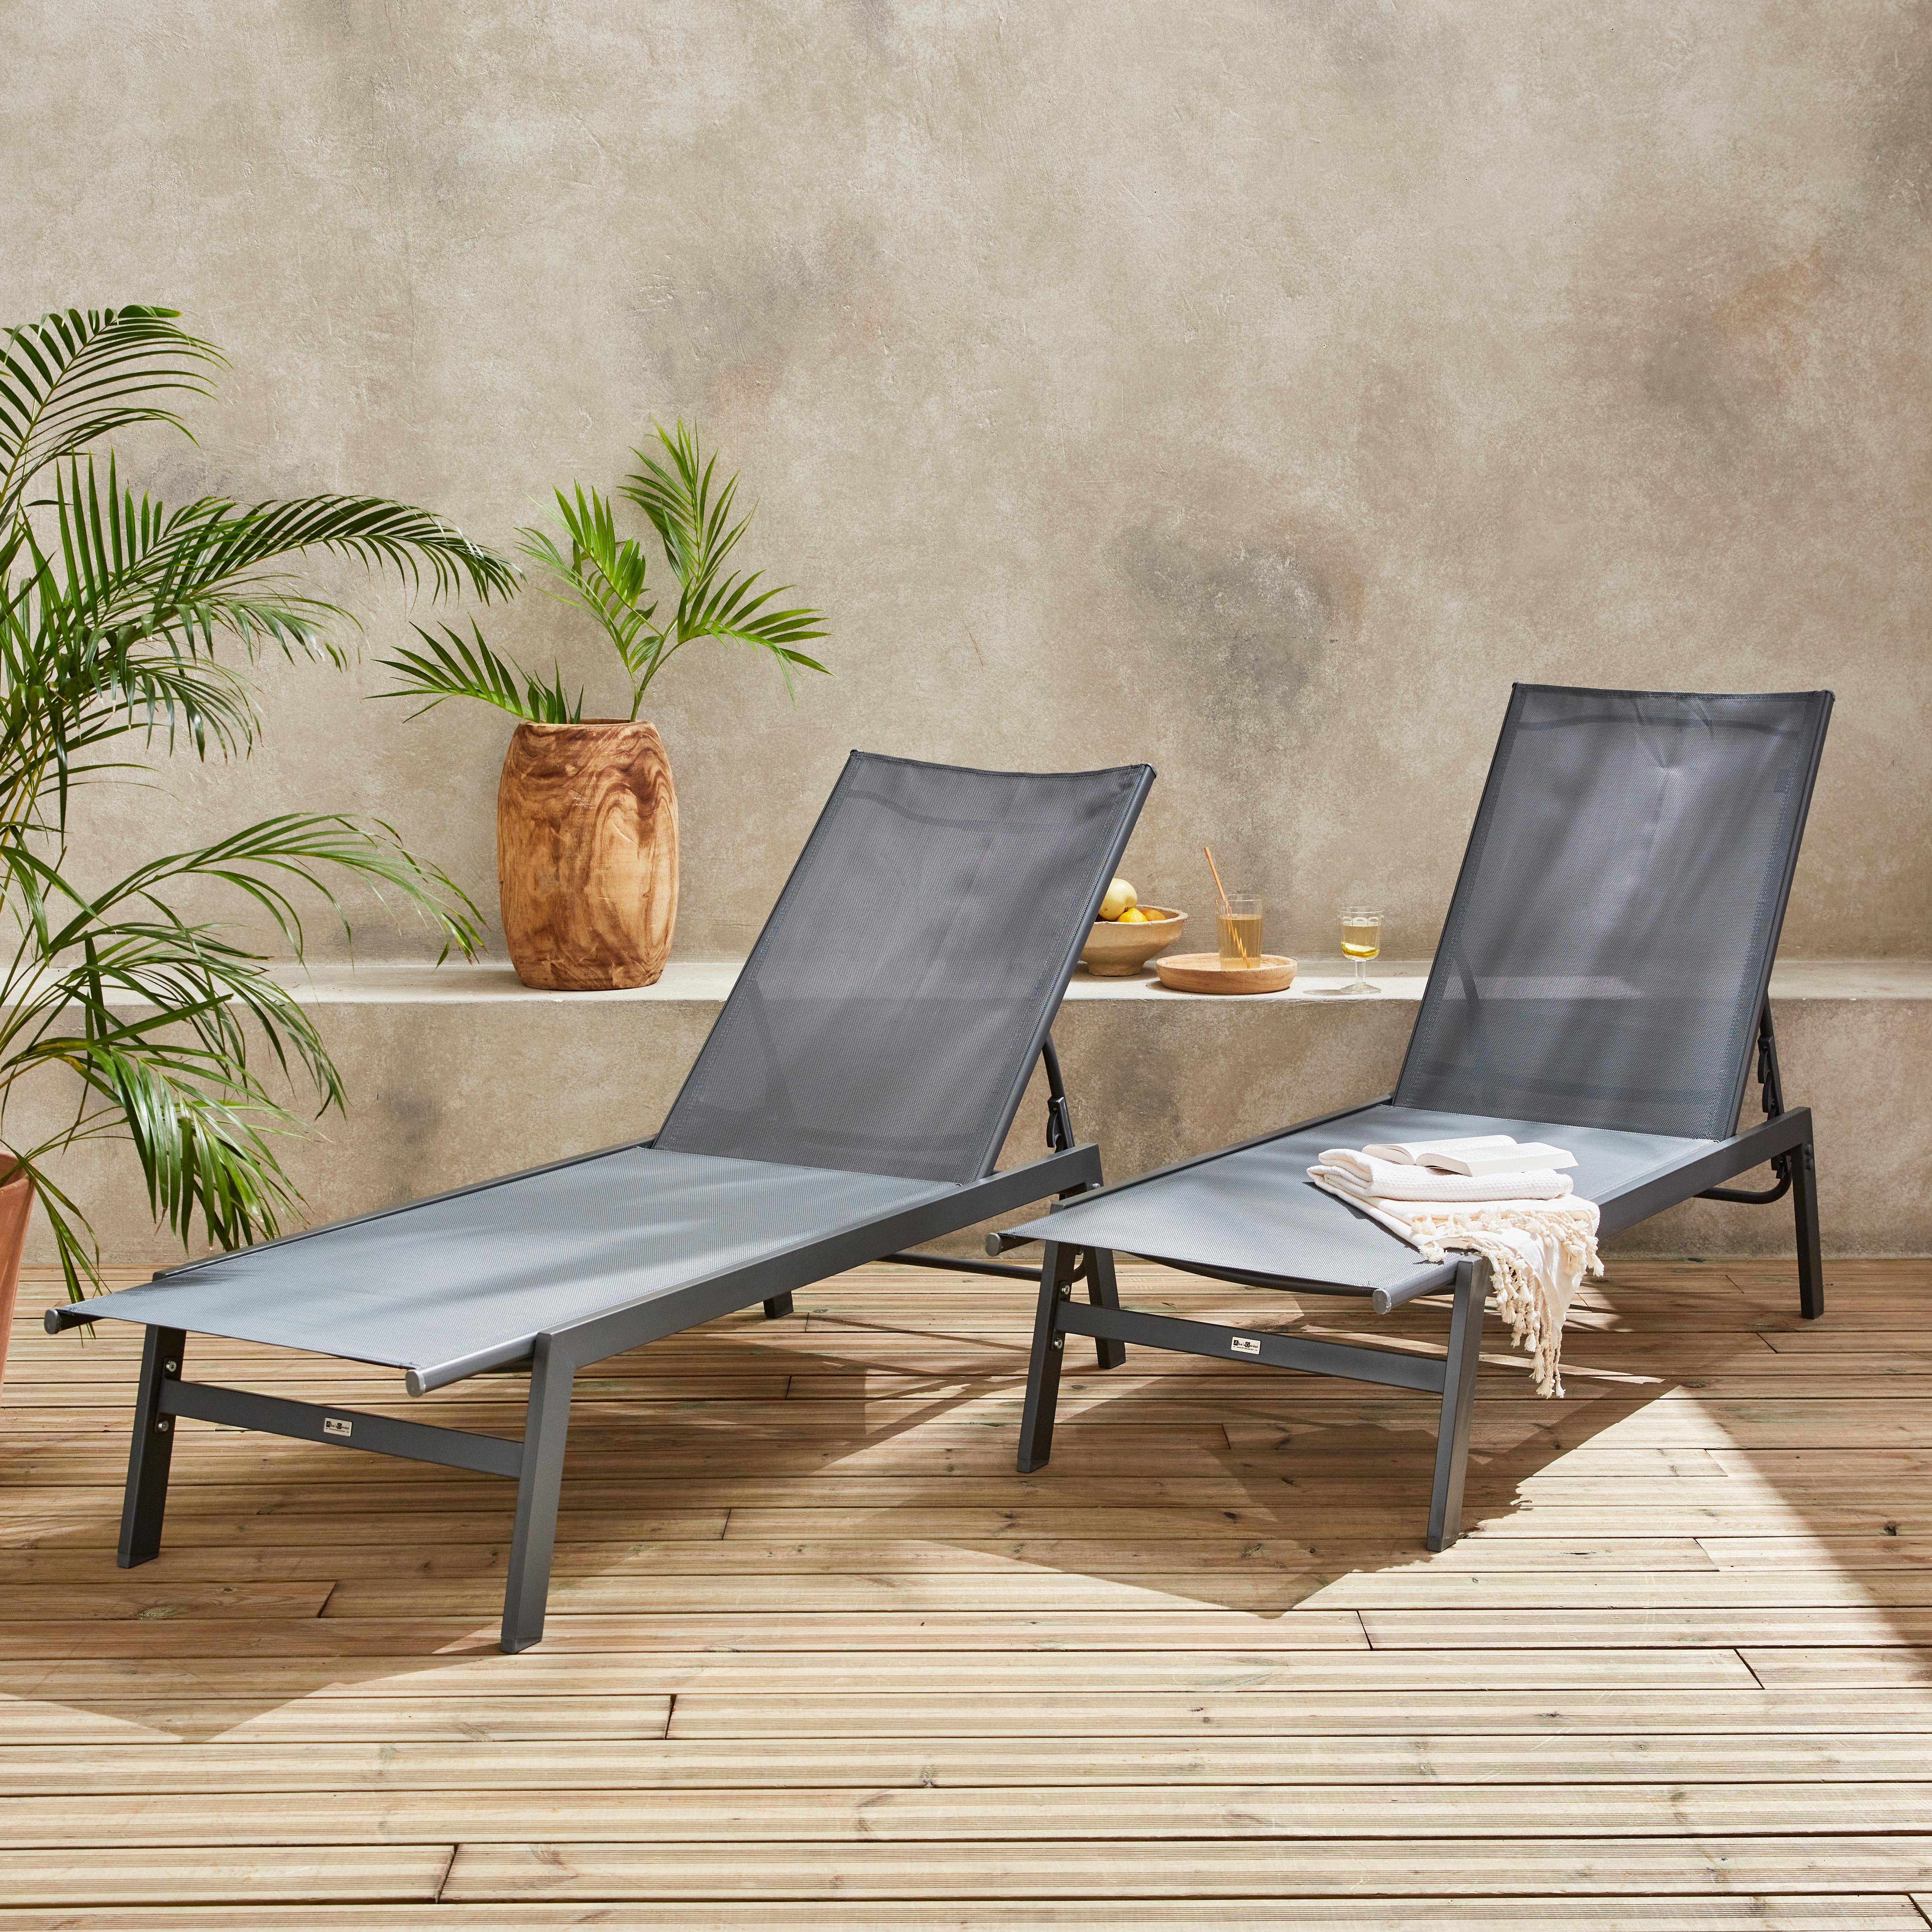 Pair of Textilene and Metal Multi-Position Sun Loungers, Anthracite,sweeek,Photo1